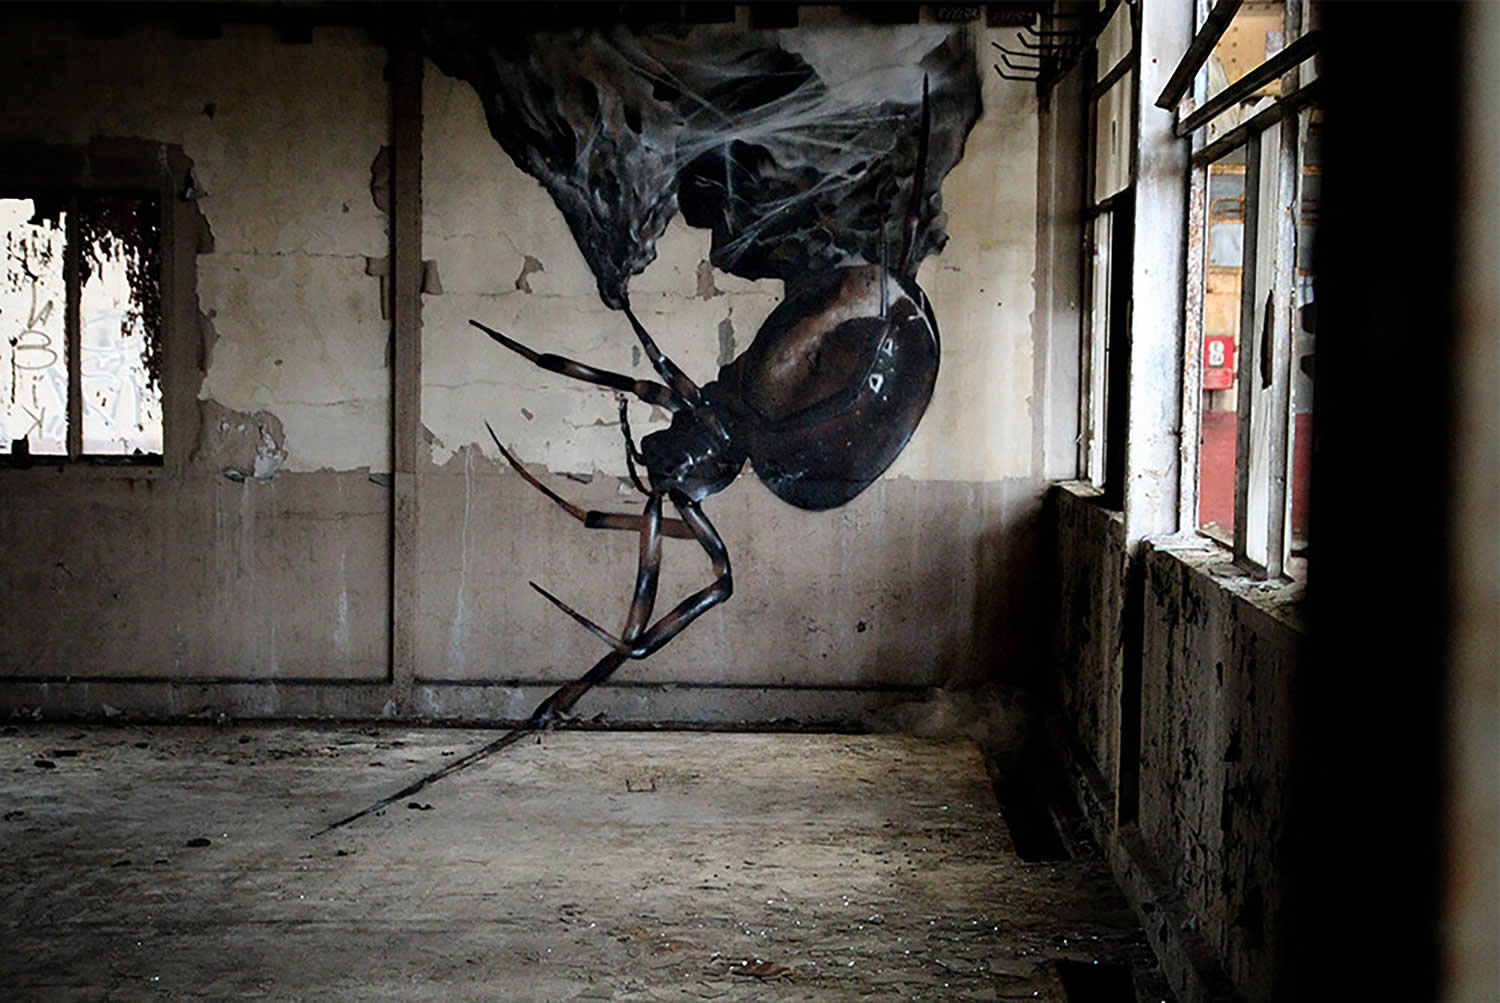 spider coming down a wall,graffiti by mantra rea